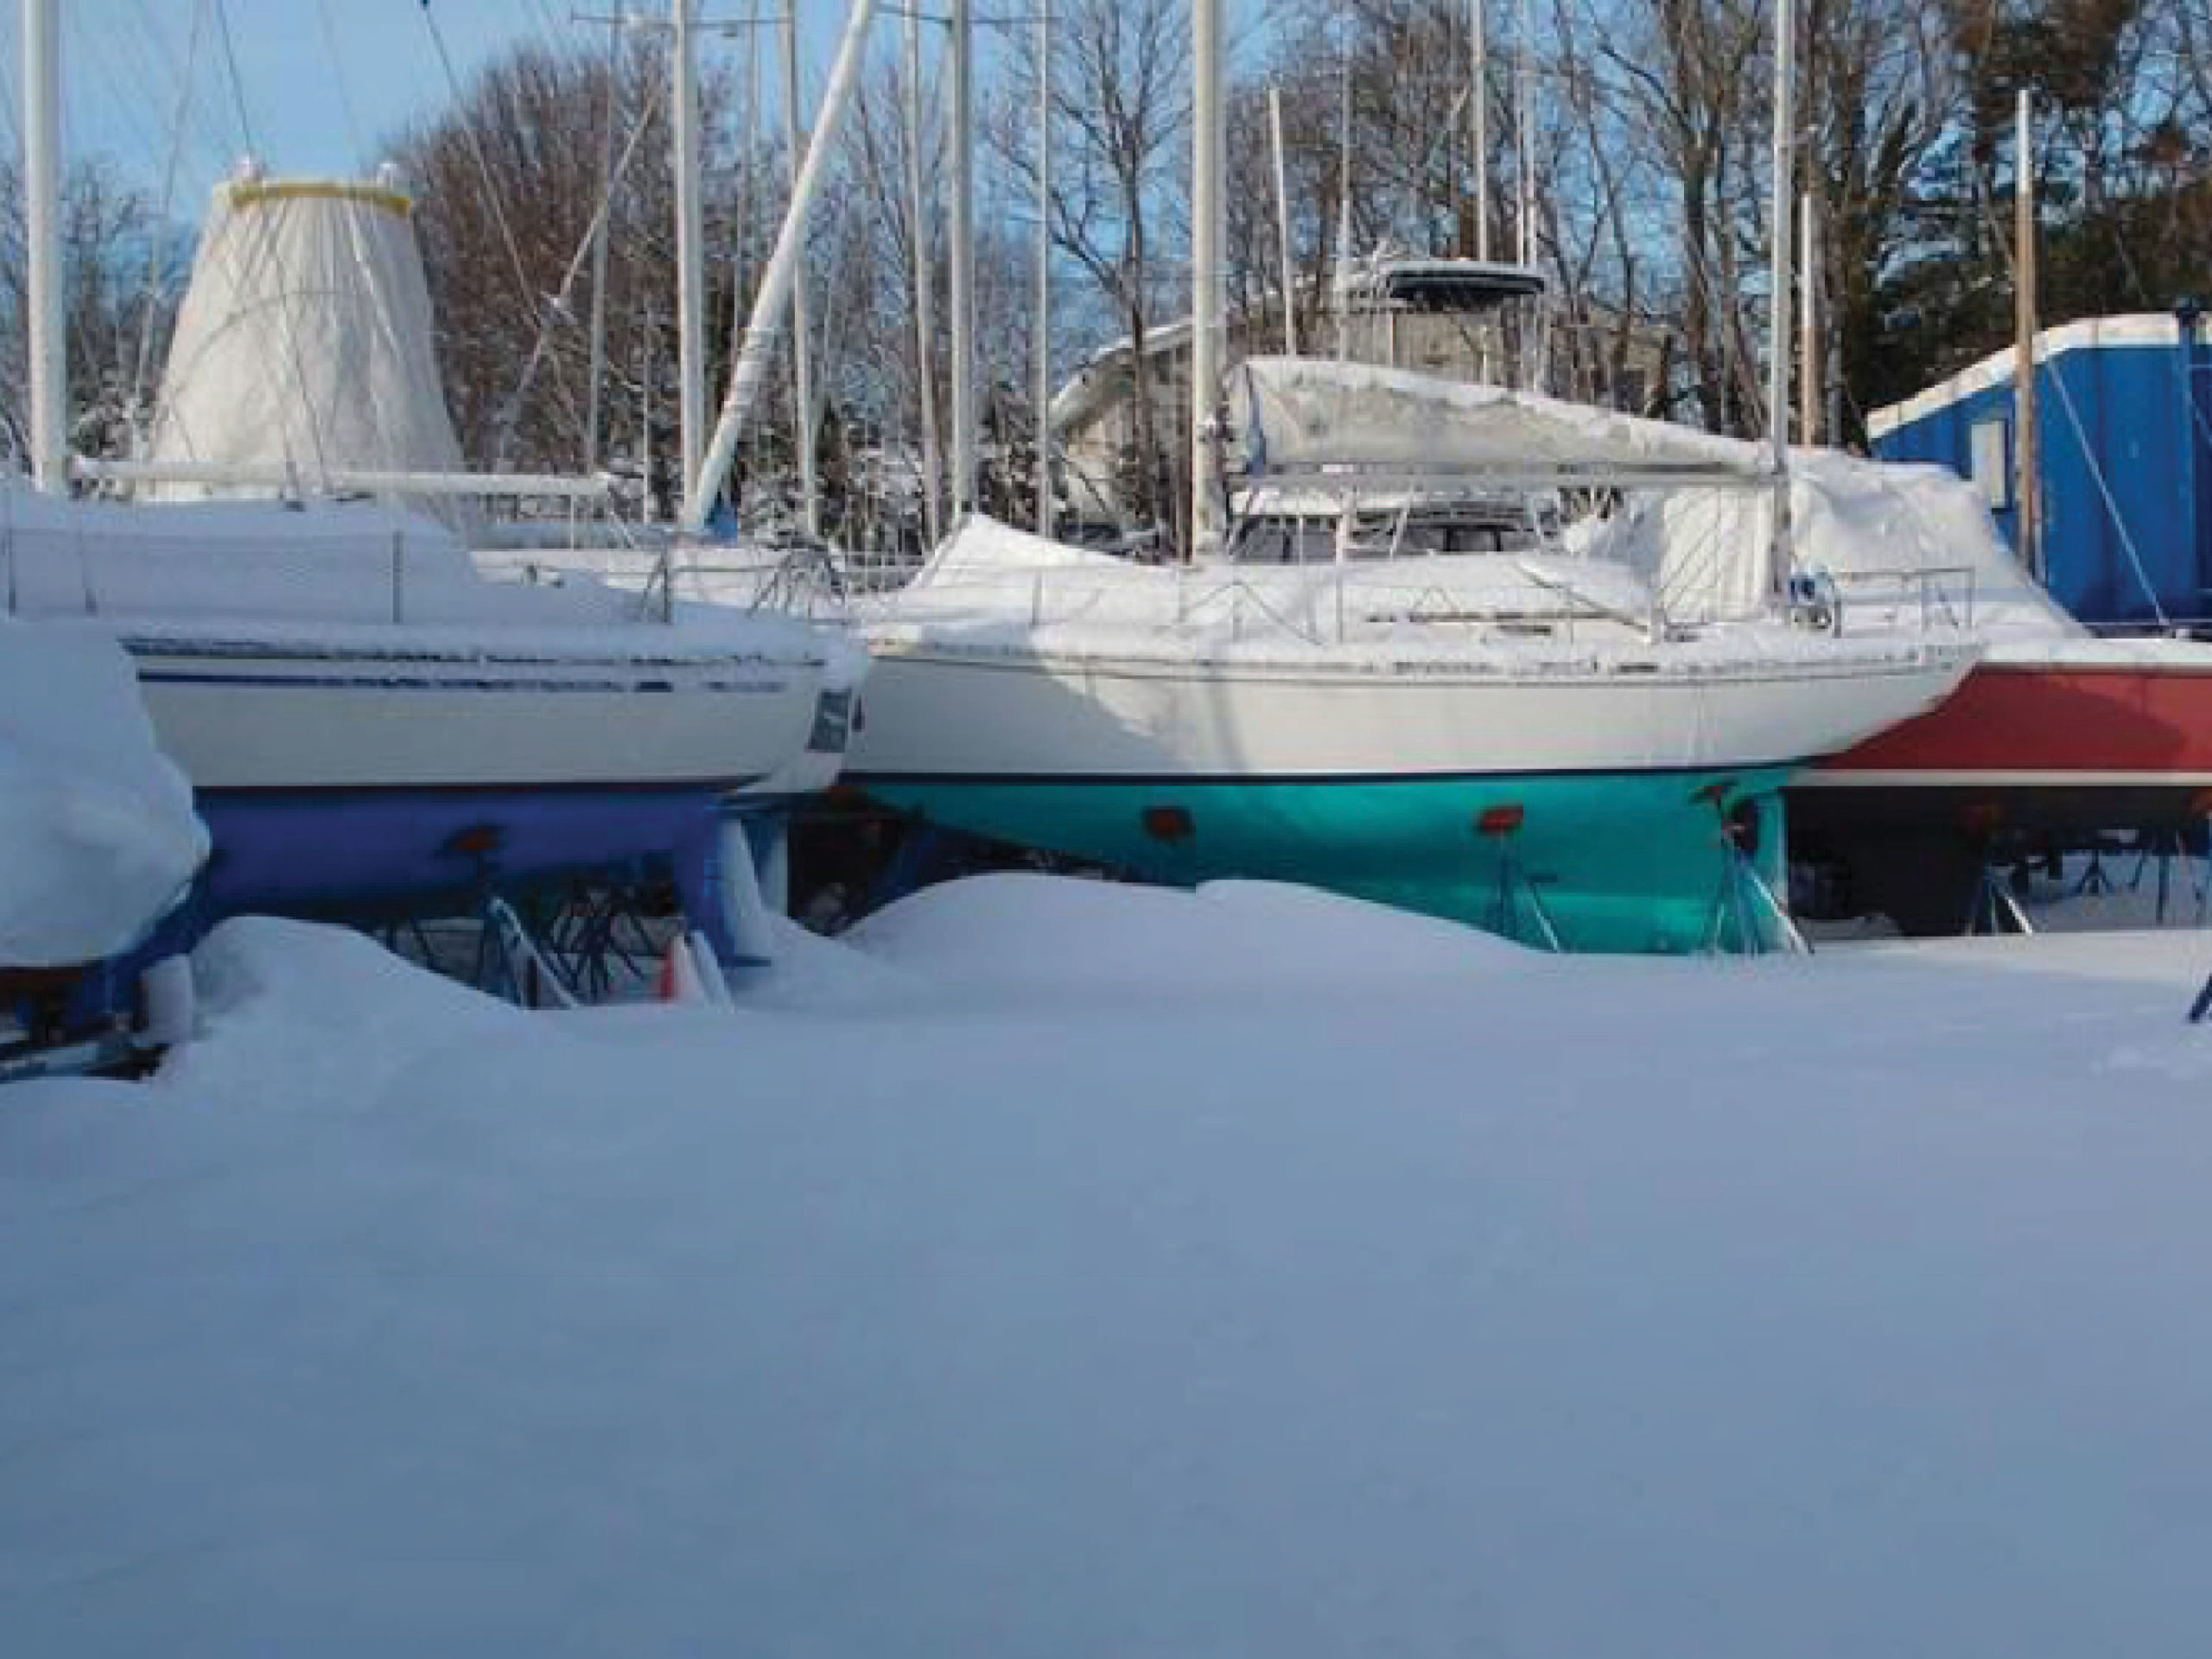 Winter dry boat storage at Fair Haven Yacht Works